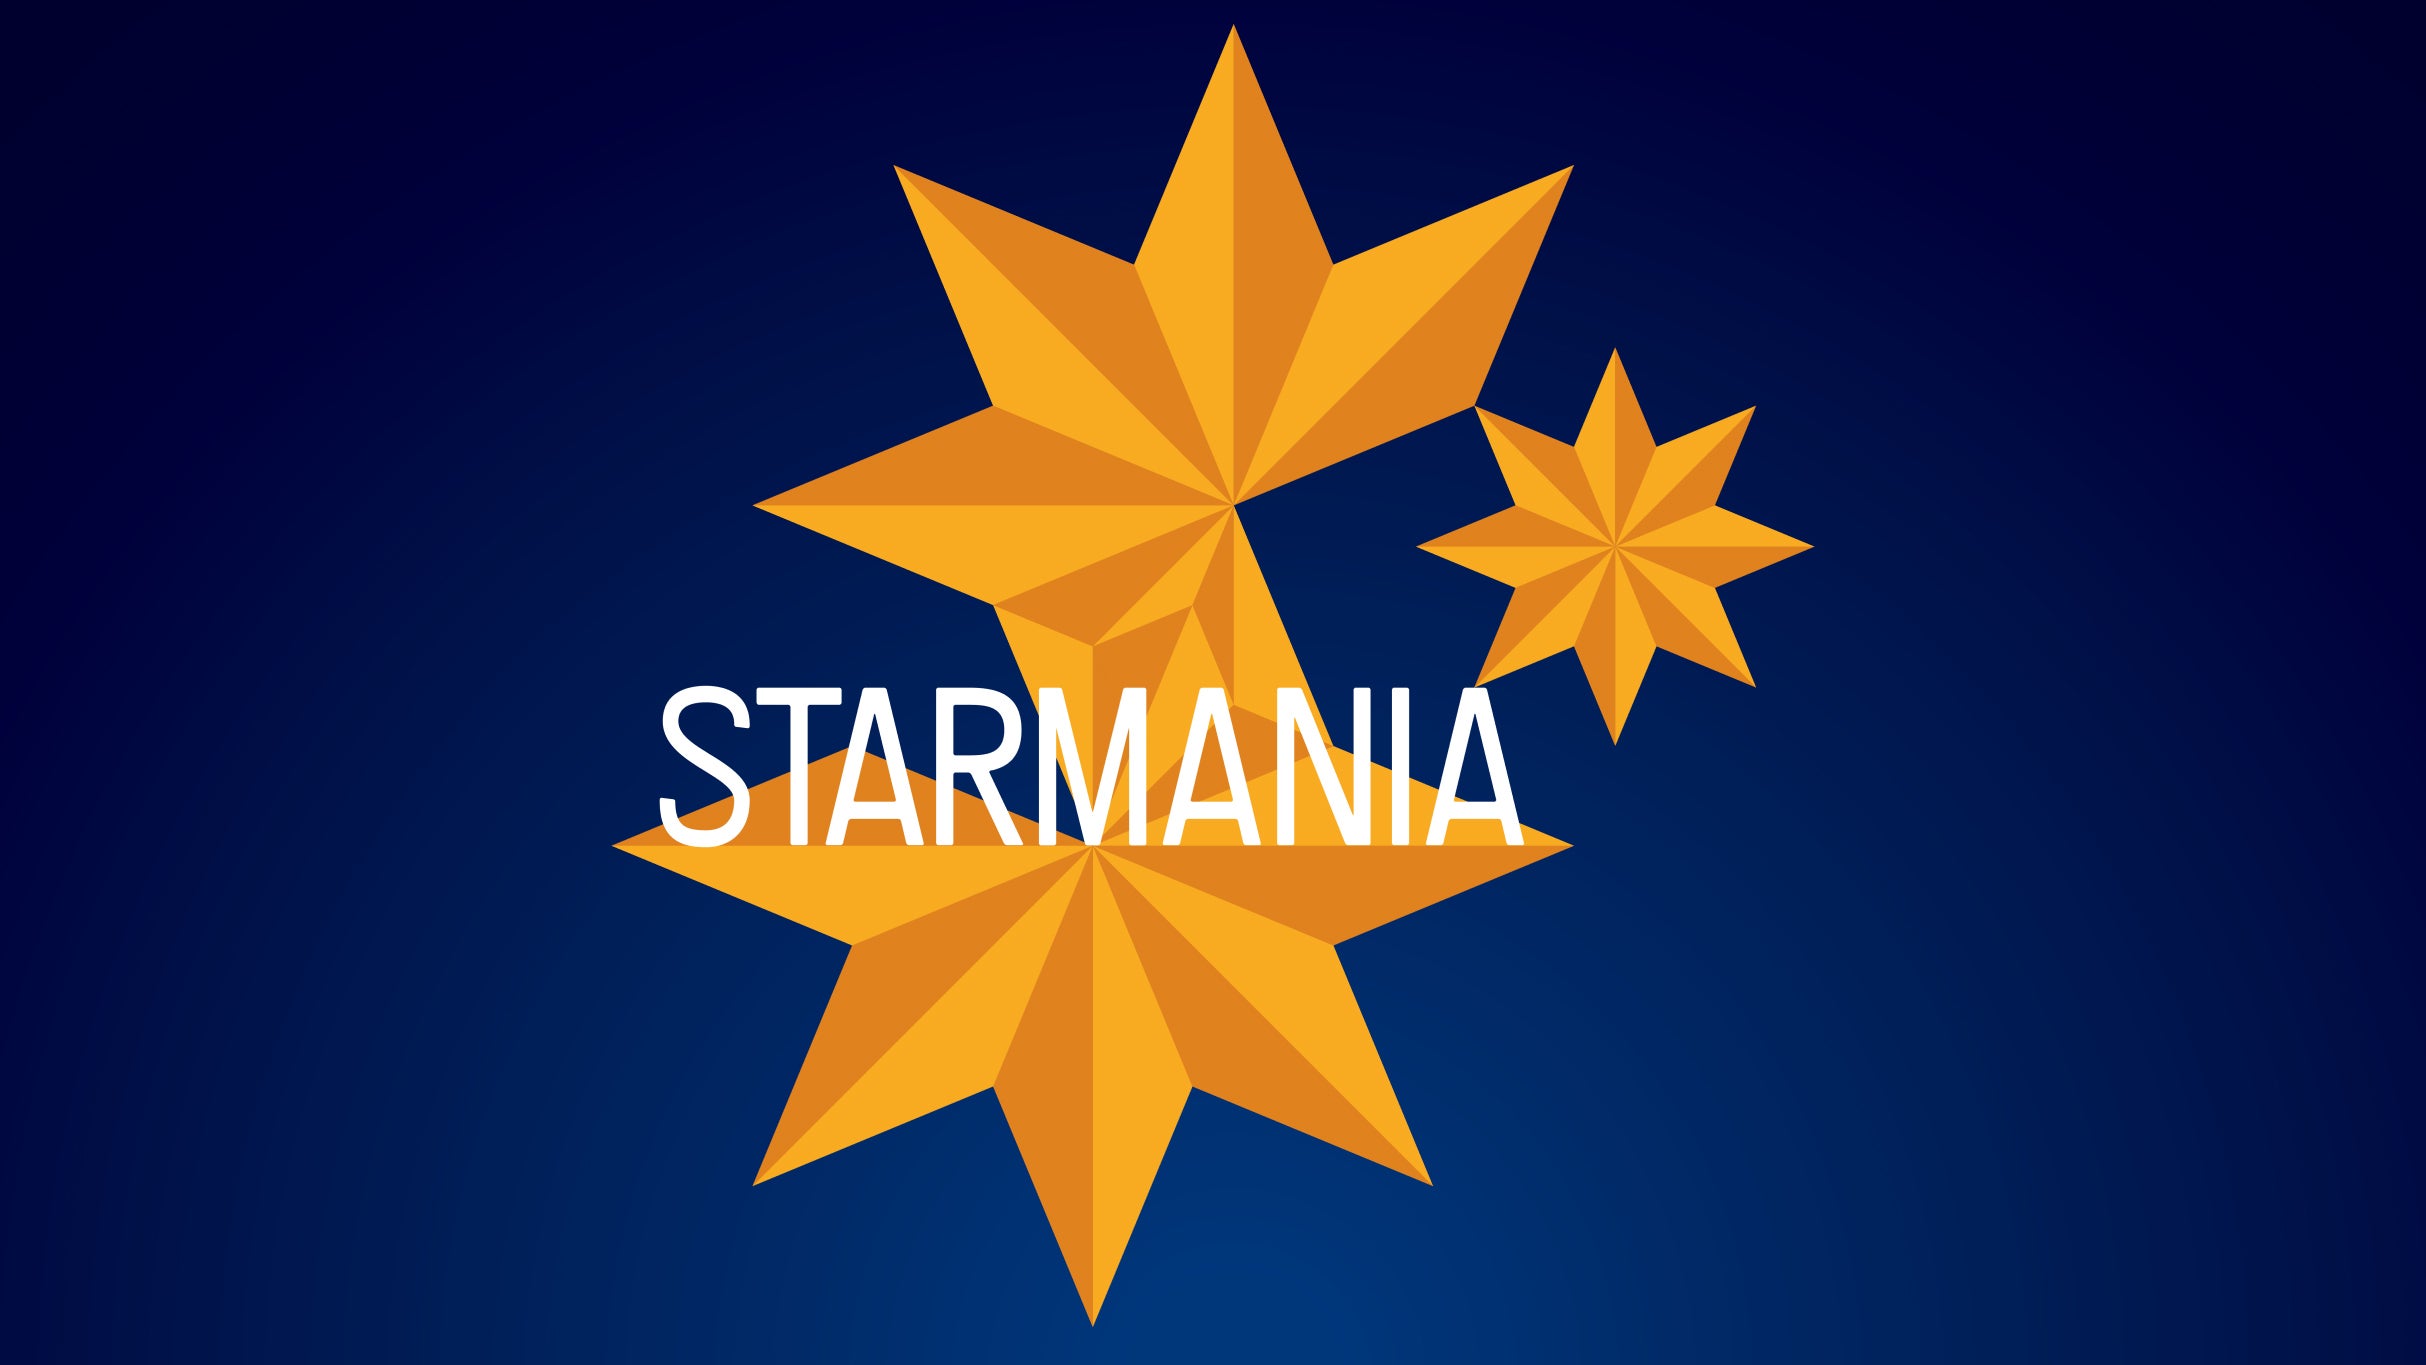 Starmania L'Opéra Rock in Laval promo photo for Offre Cyberweek  presale offer code